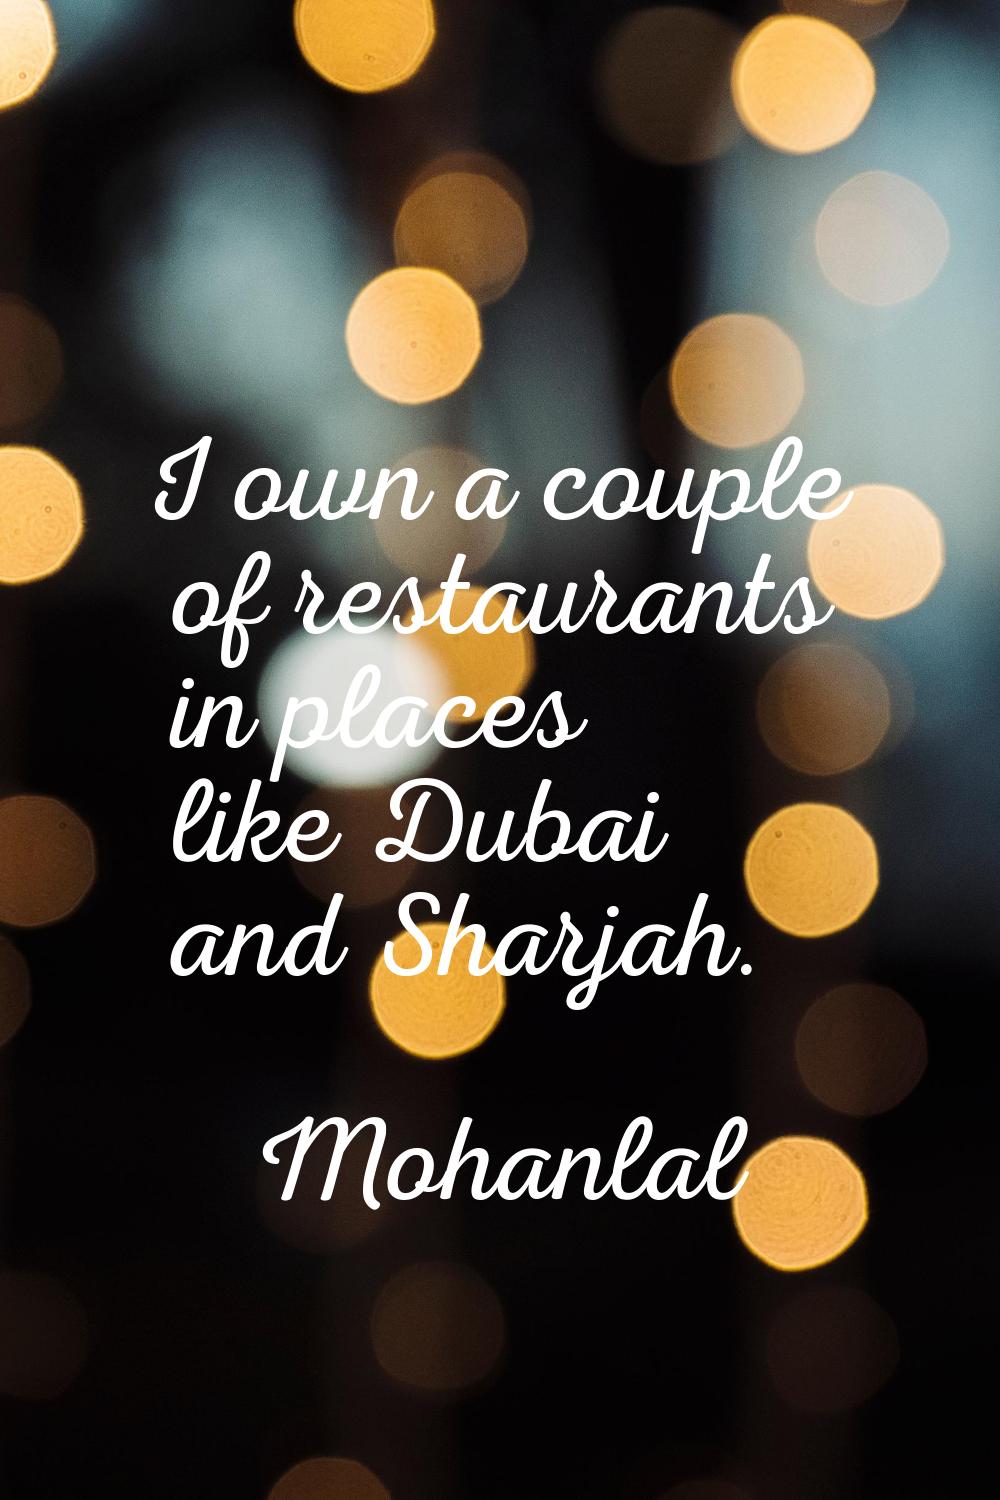 I own a couple of restaurants in places like Dubai and Sharjah.